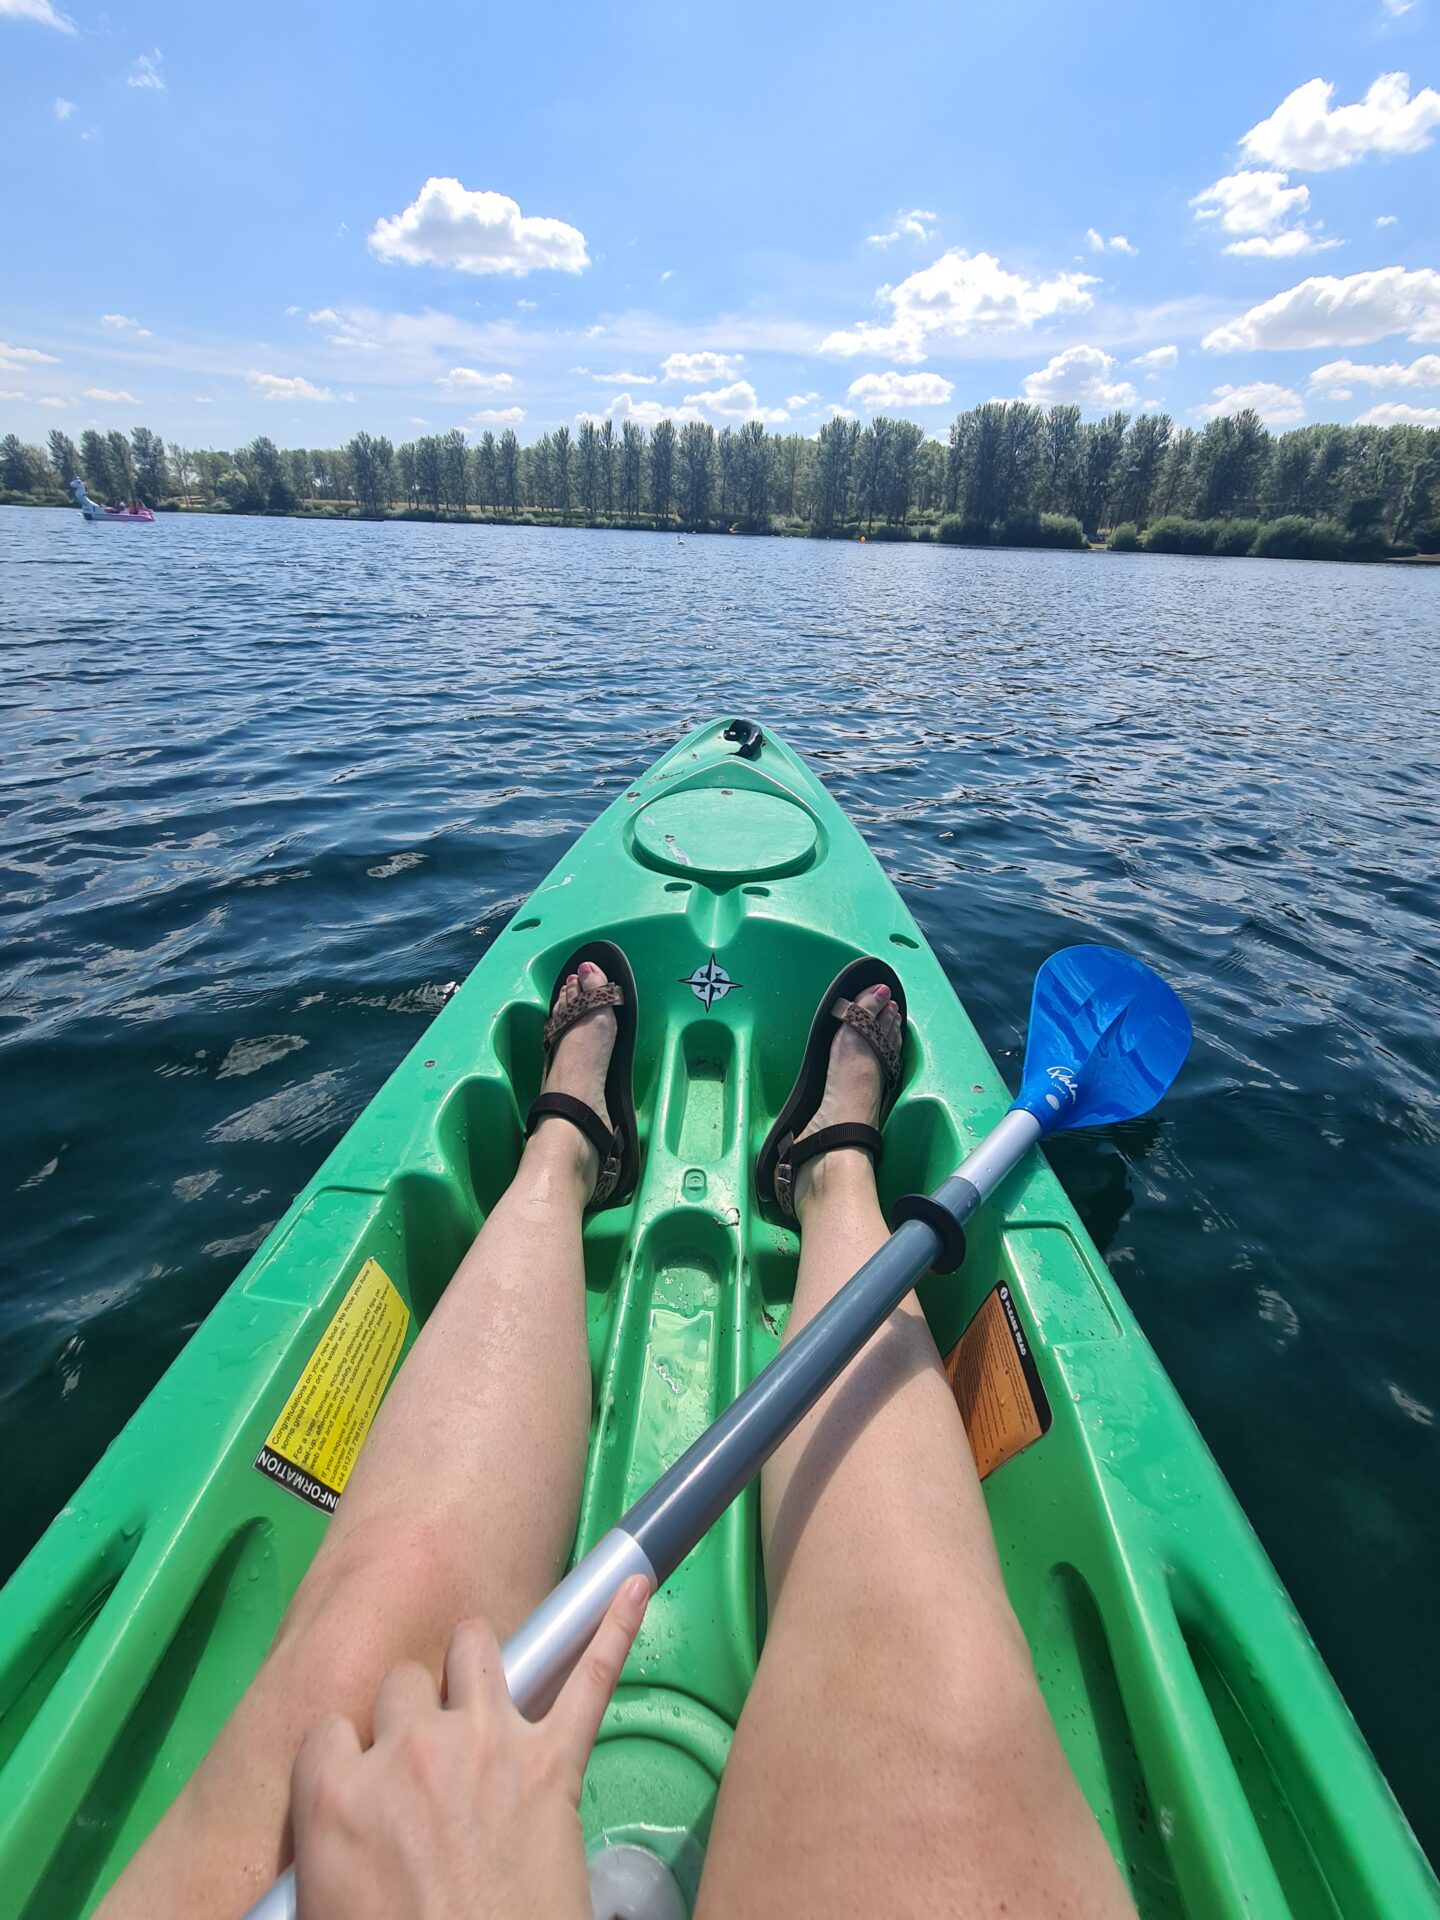 Image of legs in a kayak. A hand is holding a paddle. The water is blue with a row of trees in the background